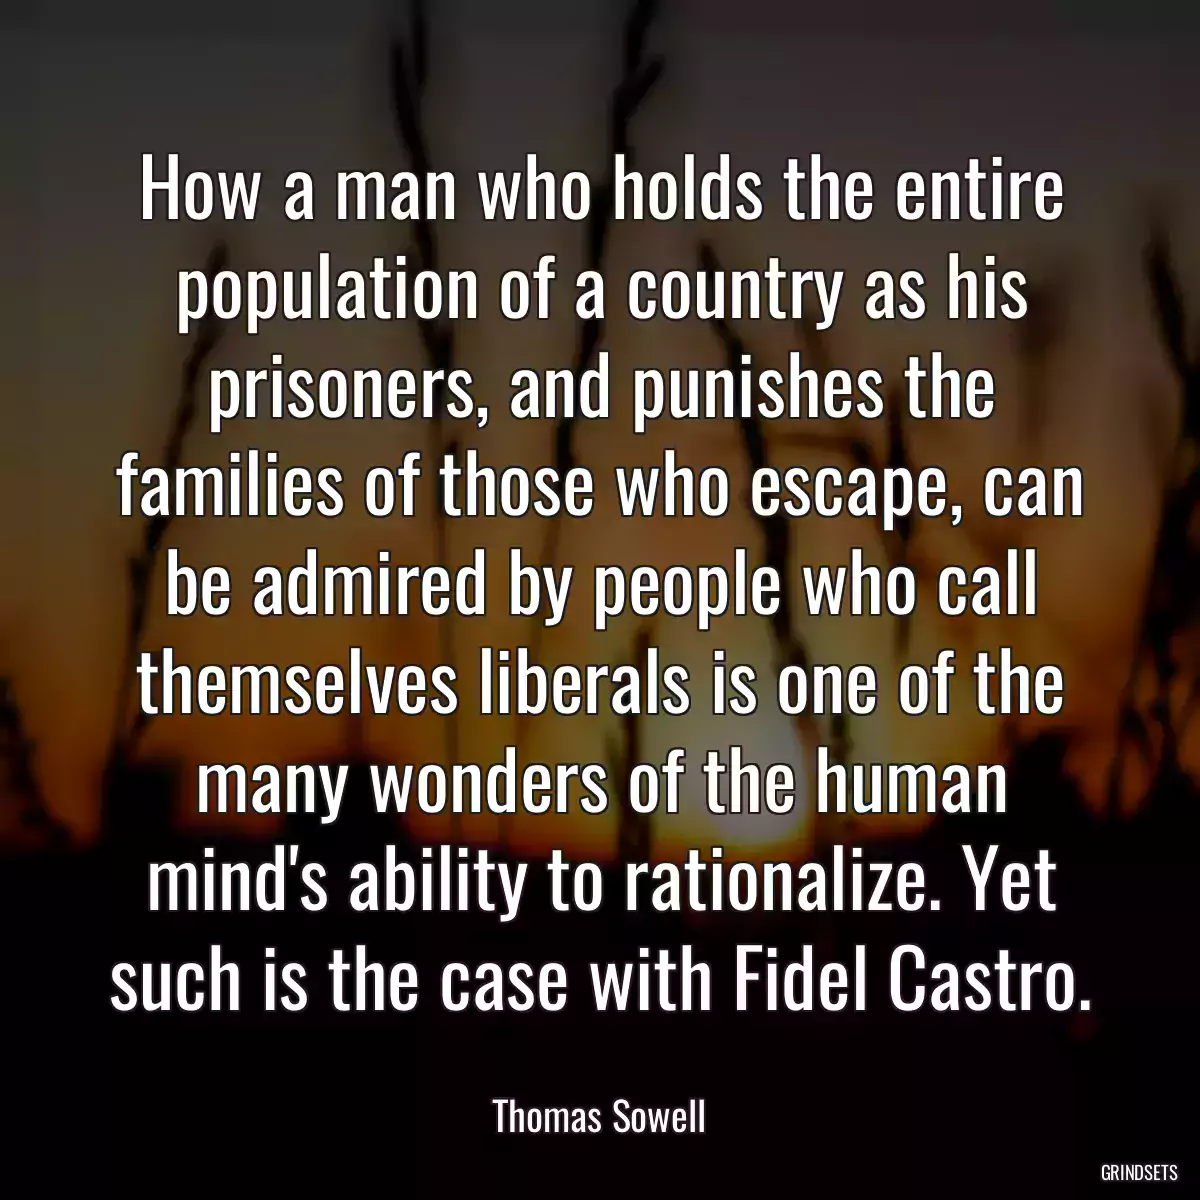 How a man who holds the entire population of a country as his prisoners, and punishes the families of those who escape, can be admired by people who call themselves liberals is one of the many wonders of the human mind\'s ability to rationalize. Yet such is the case with Fidel Castro.